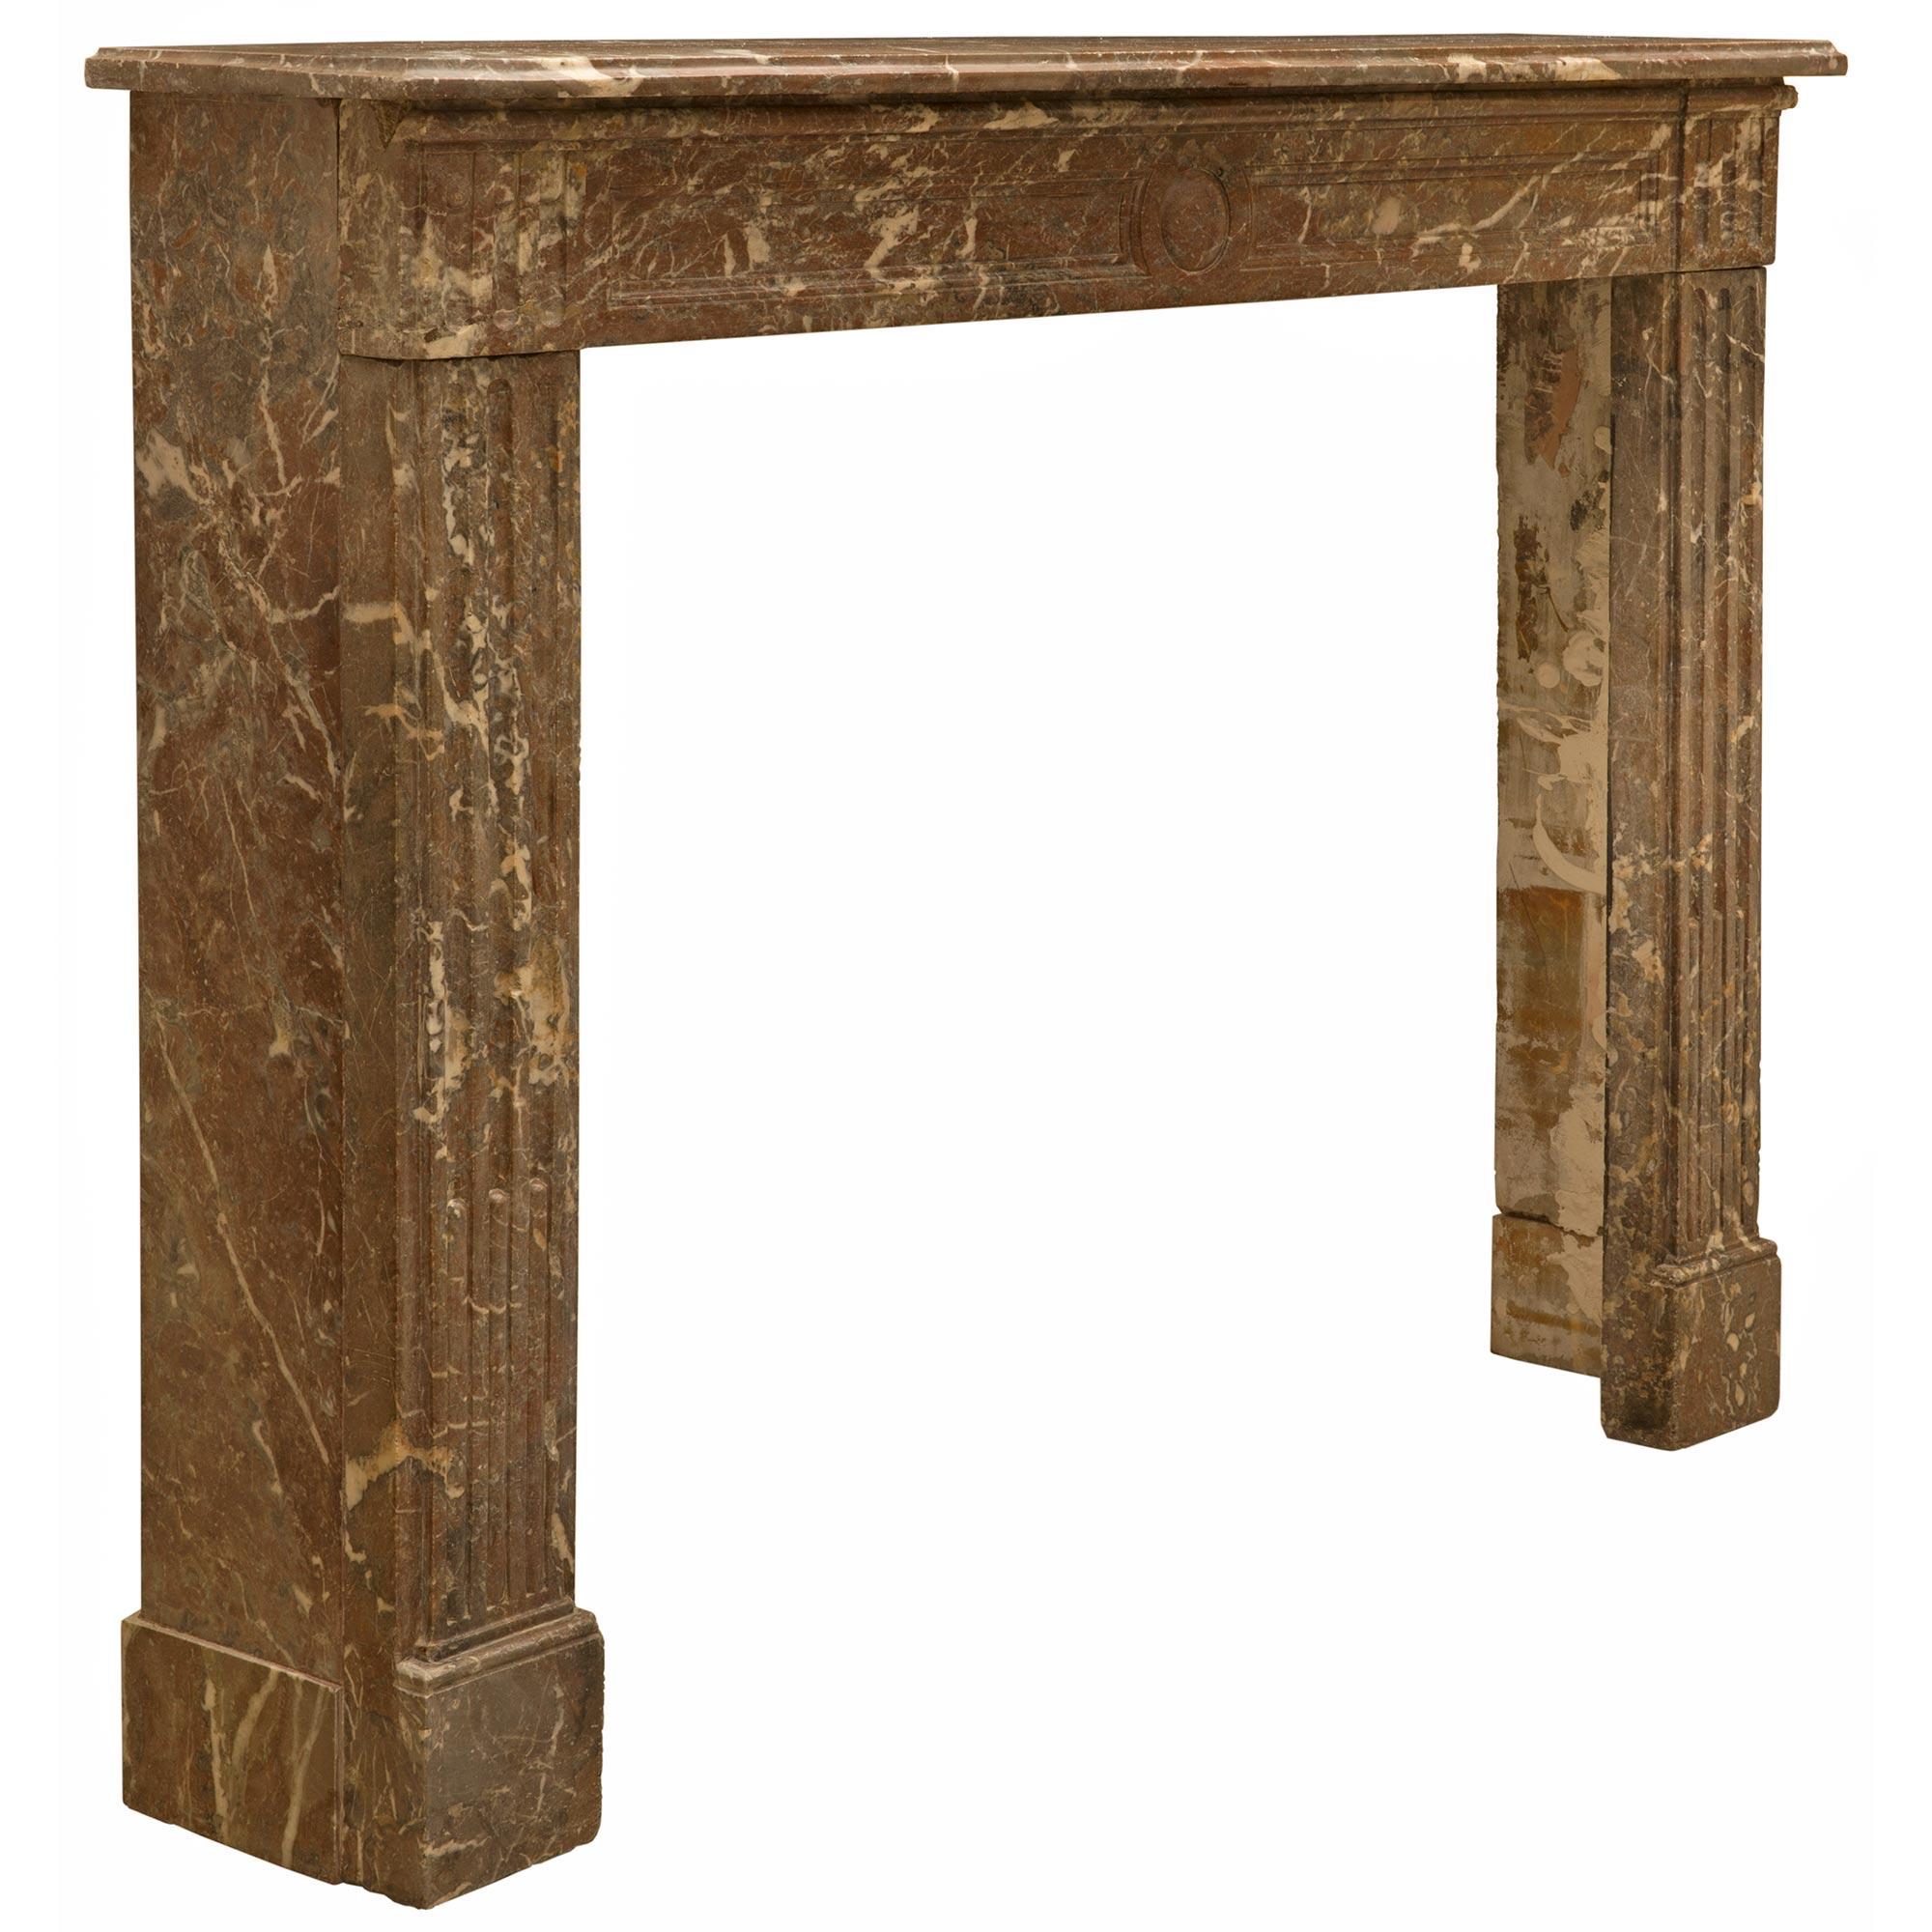 French 19th Century Louis XVI Style Rouge Catalan Marble Fireplace Mantel In Good Condition For Sale In West Palm Beach, FL